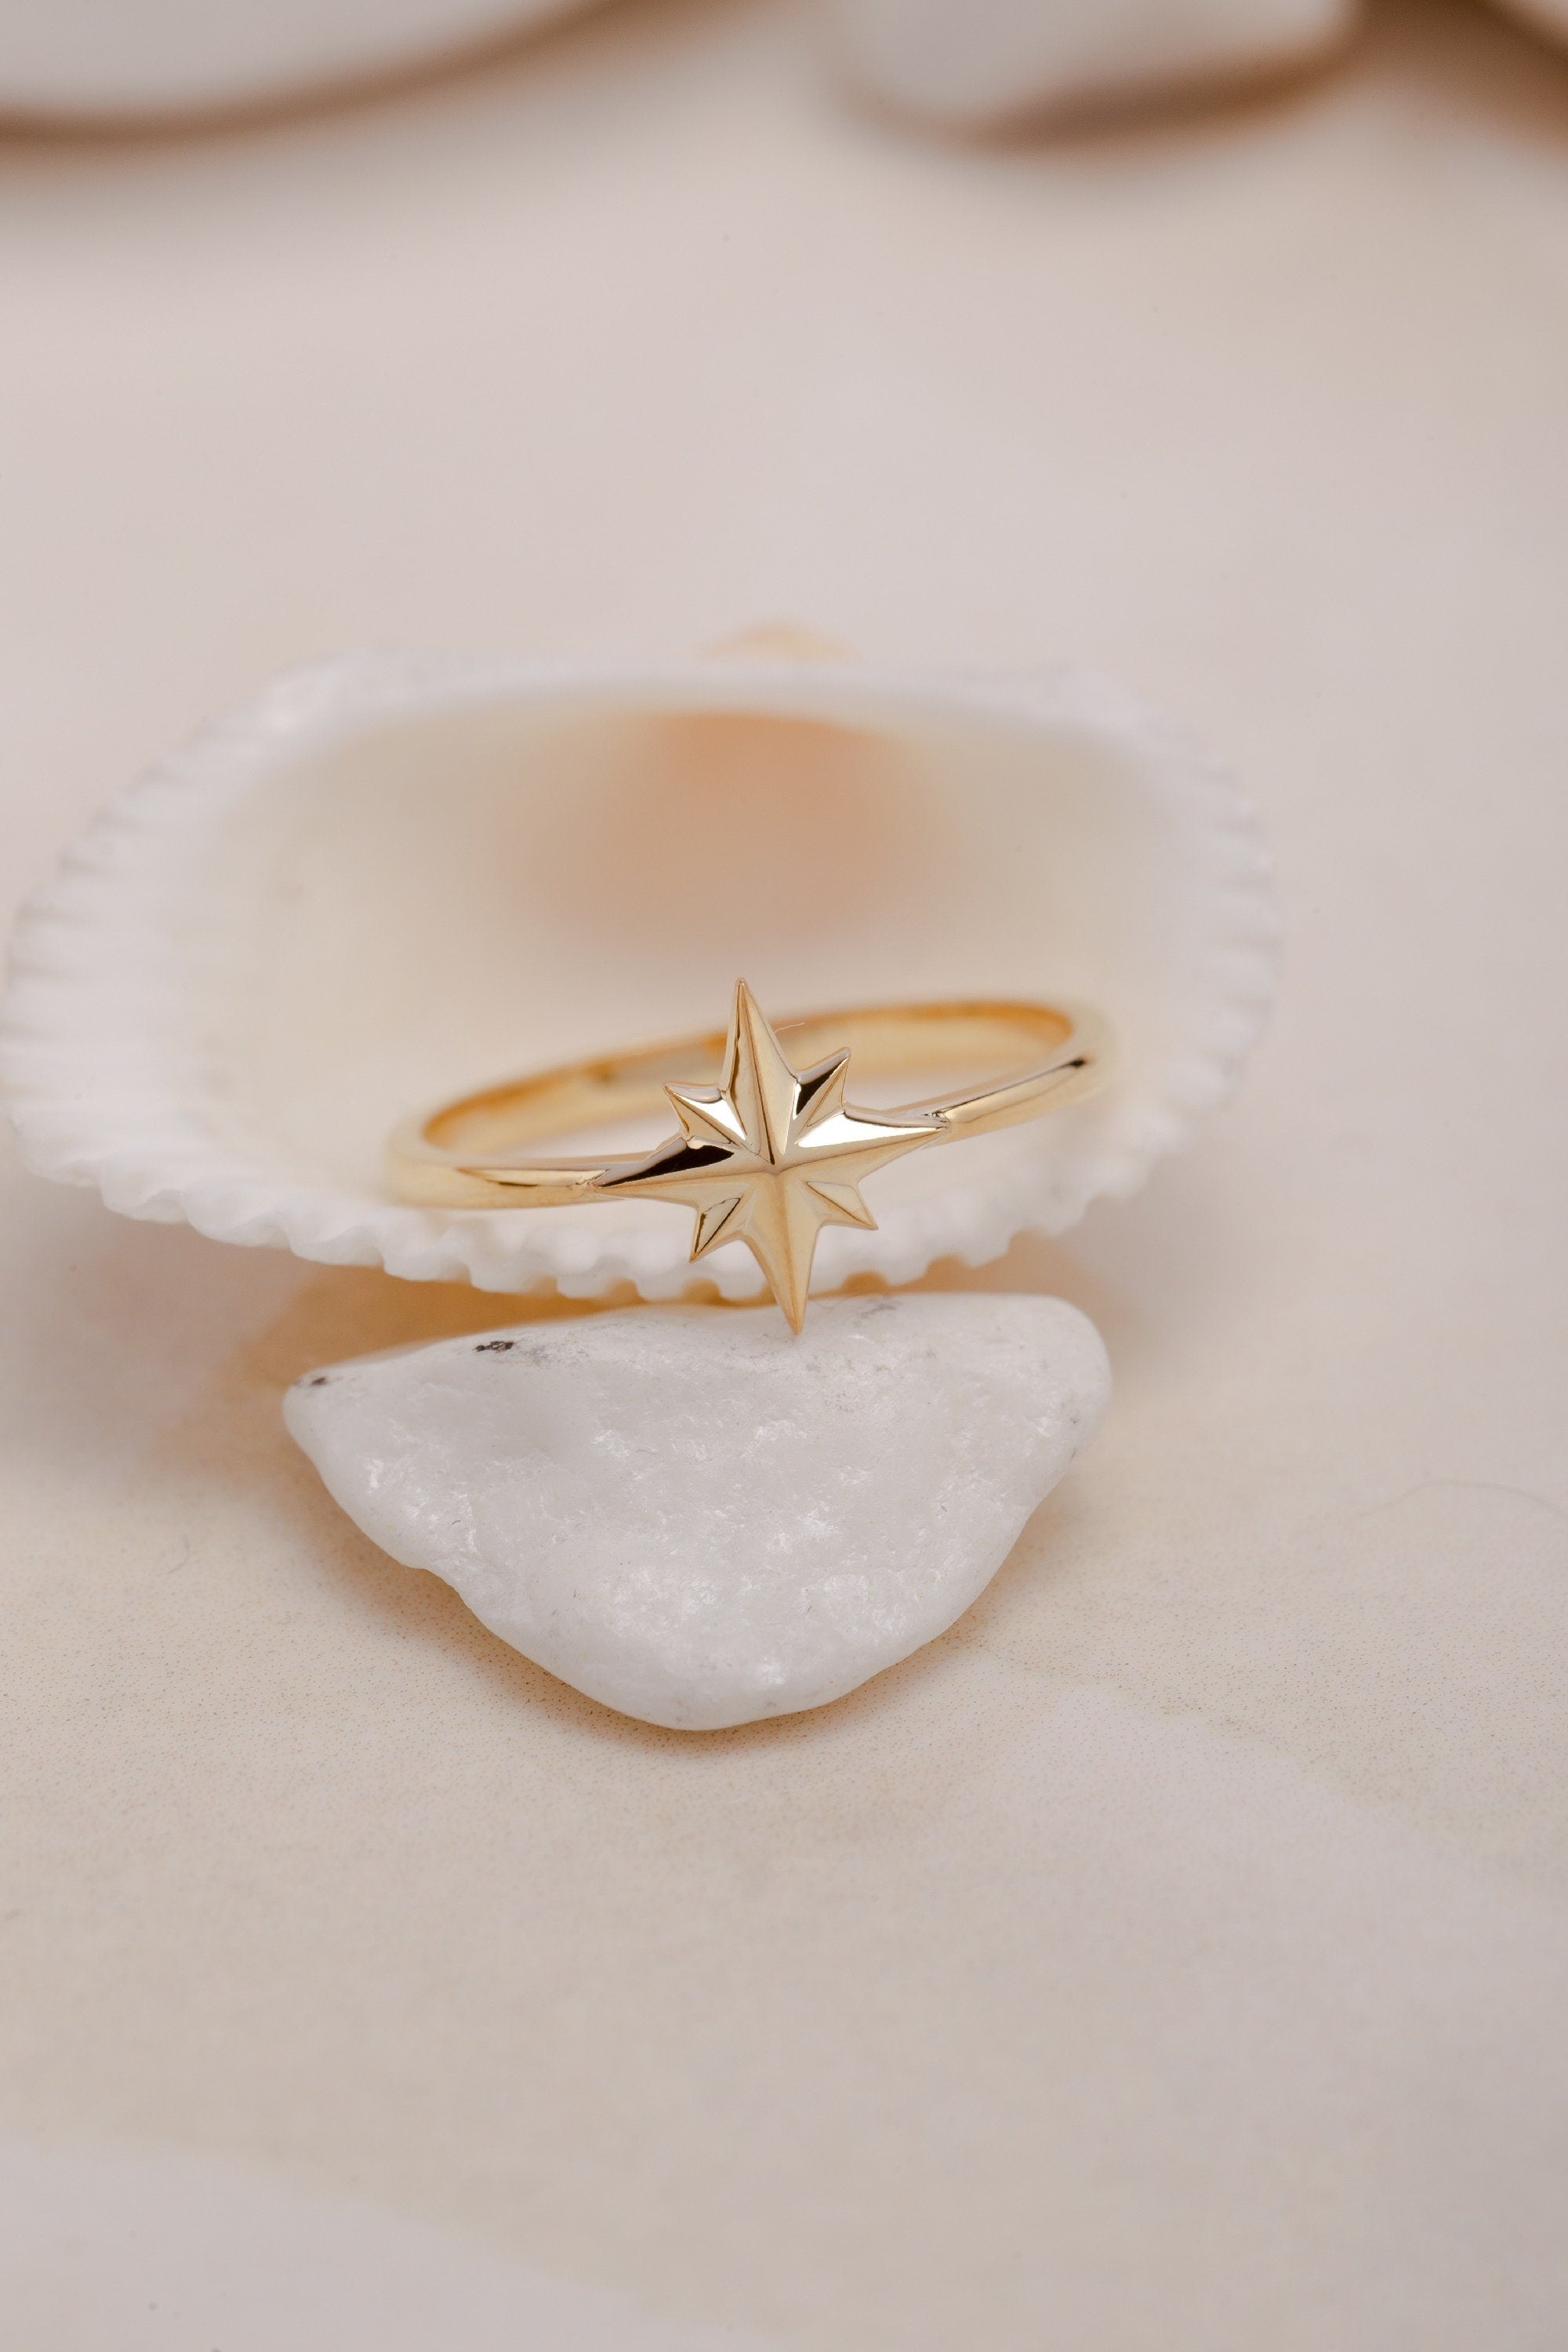 Stunning 14K Gold Pole Star Ring with Celestial Jewelry Silver Accents, 925 Silver Guiding Star Band, Sky Inspired Minimalist Jewelry